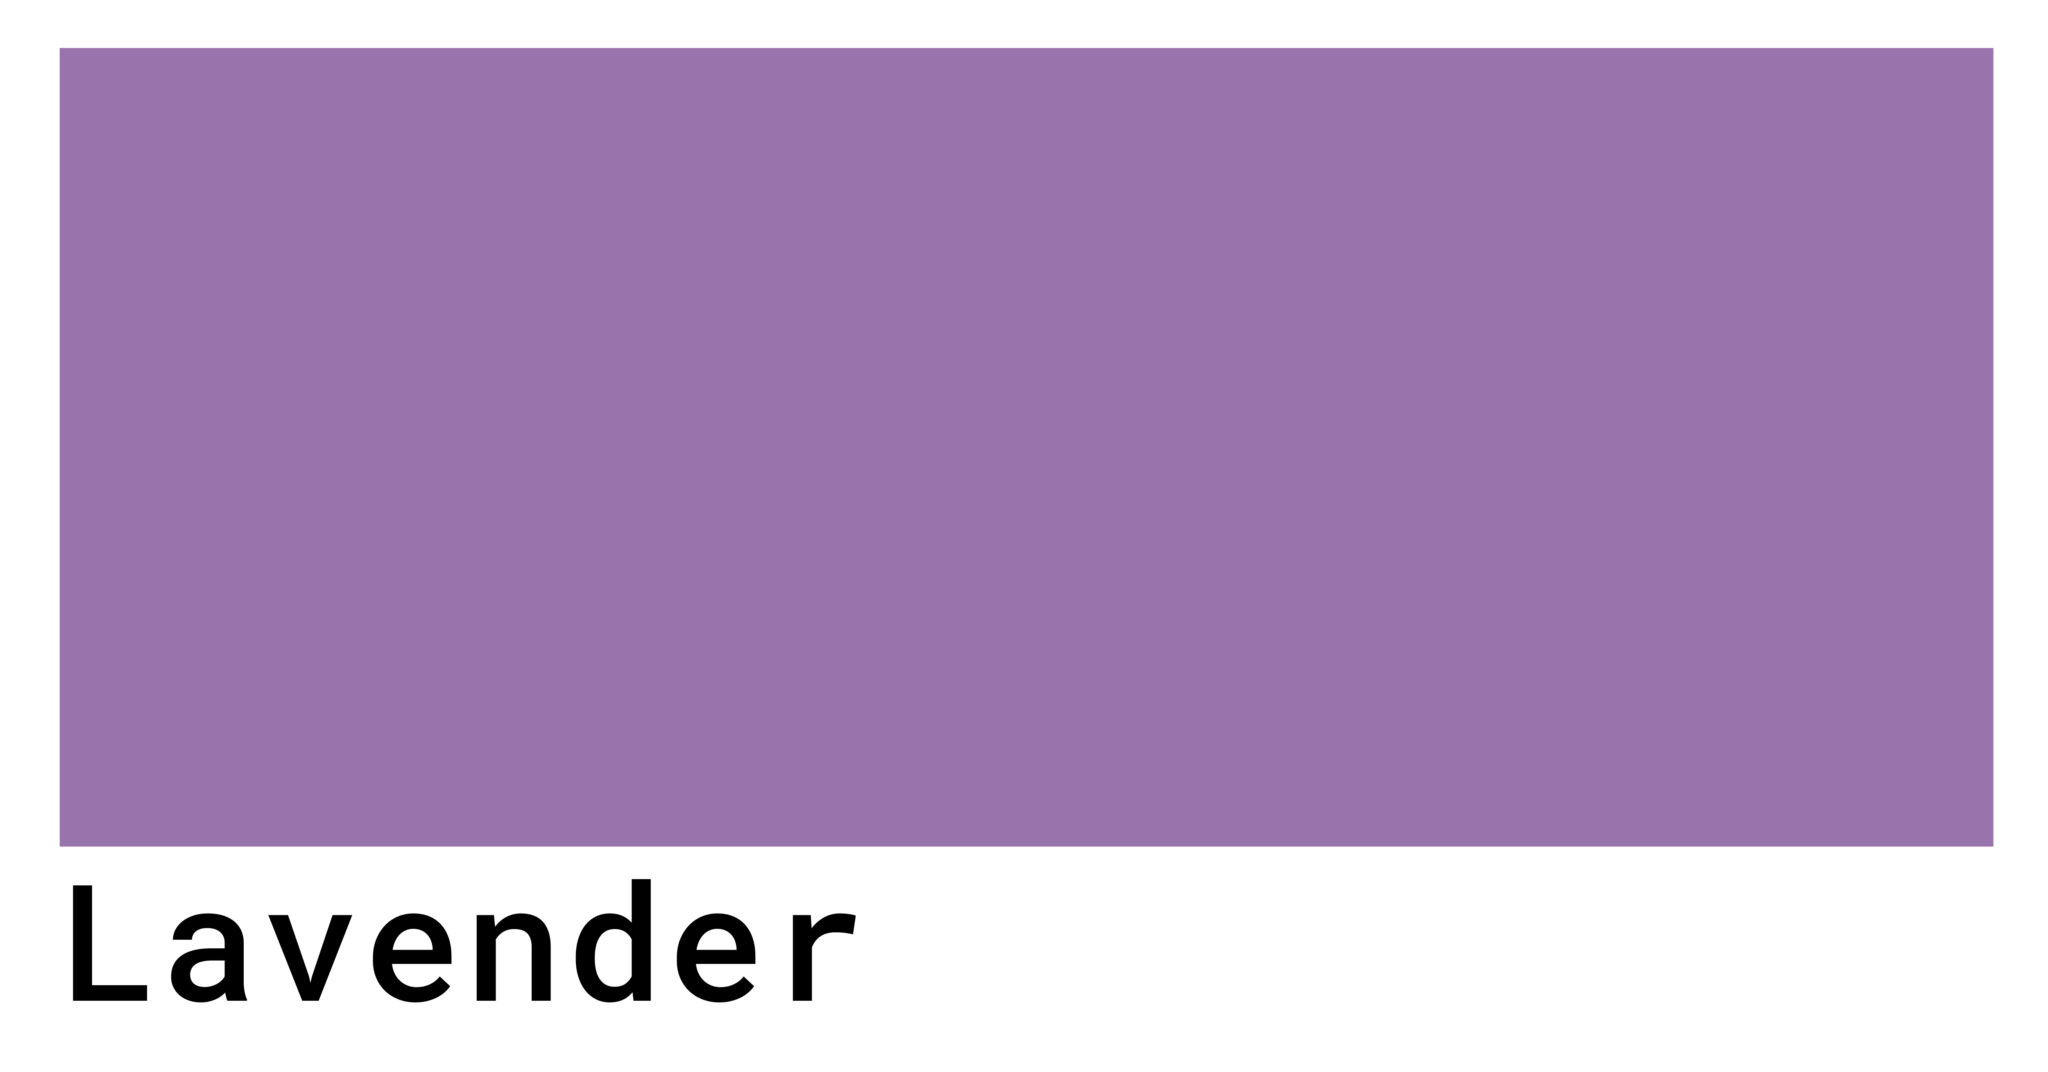 8. "Muted Lavender" - wide 6